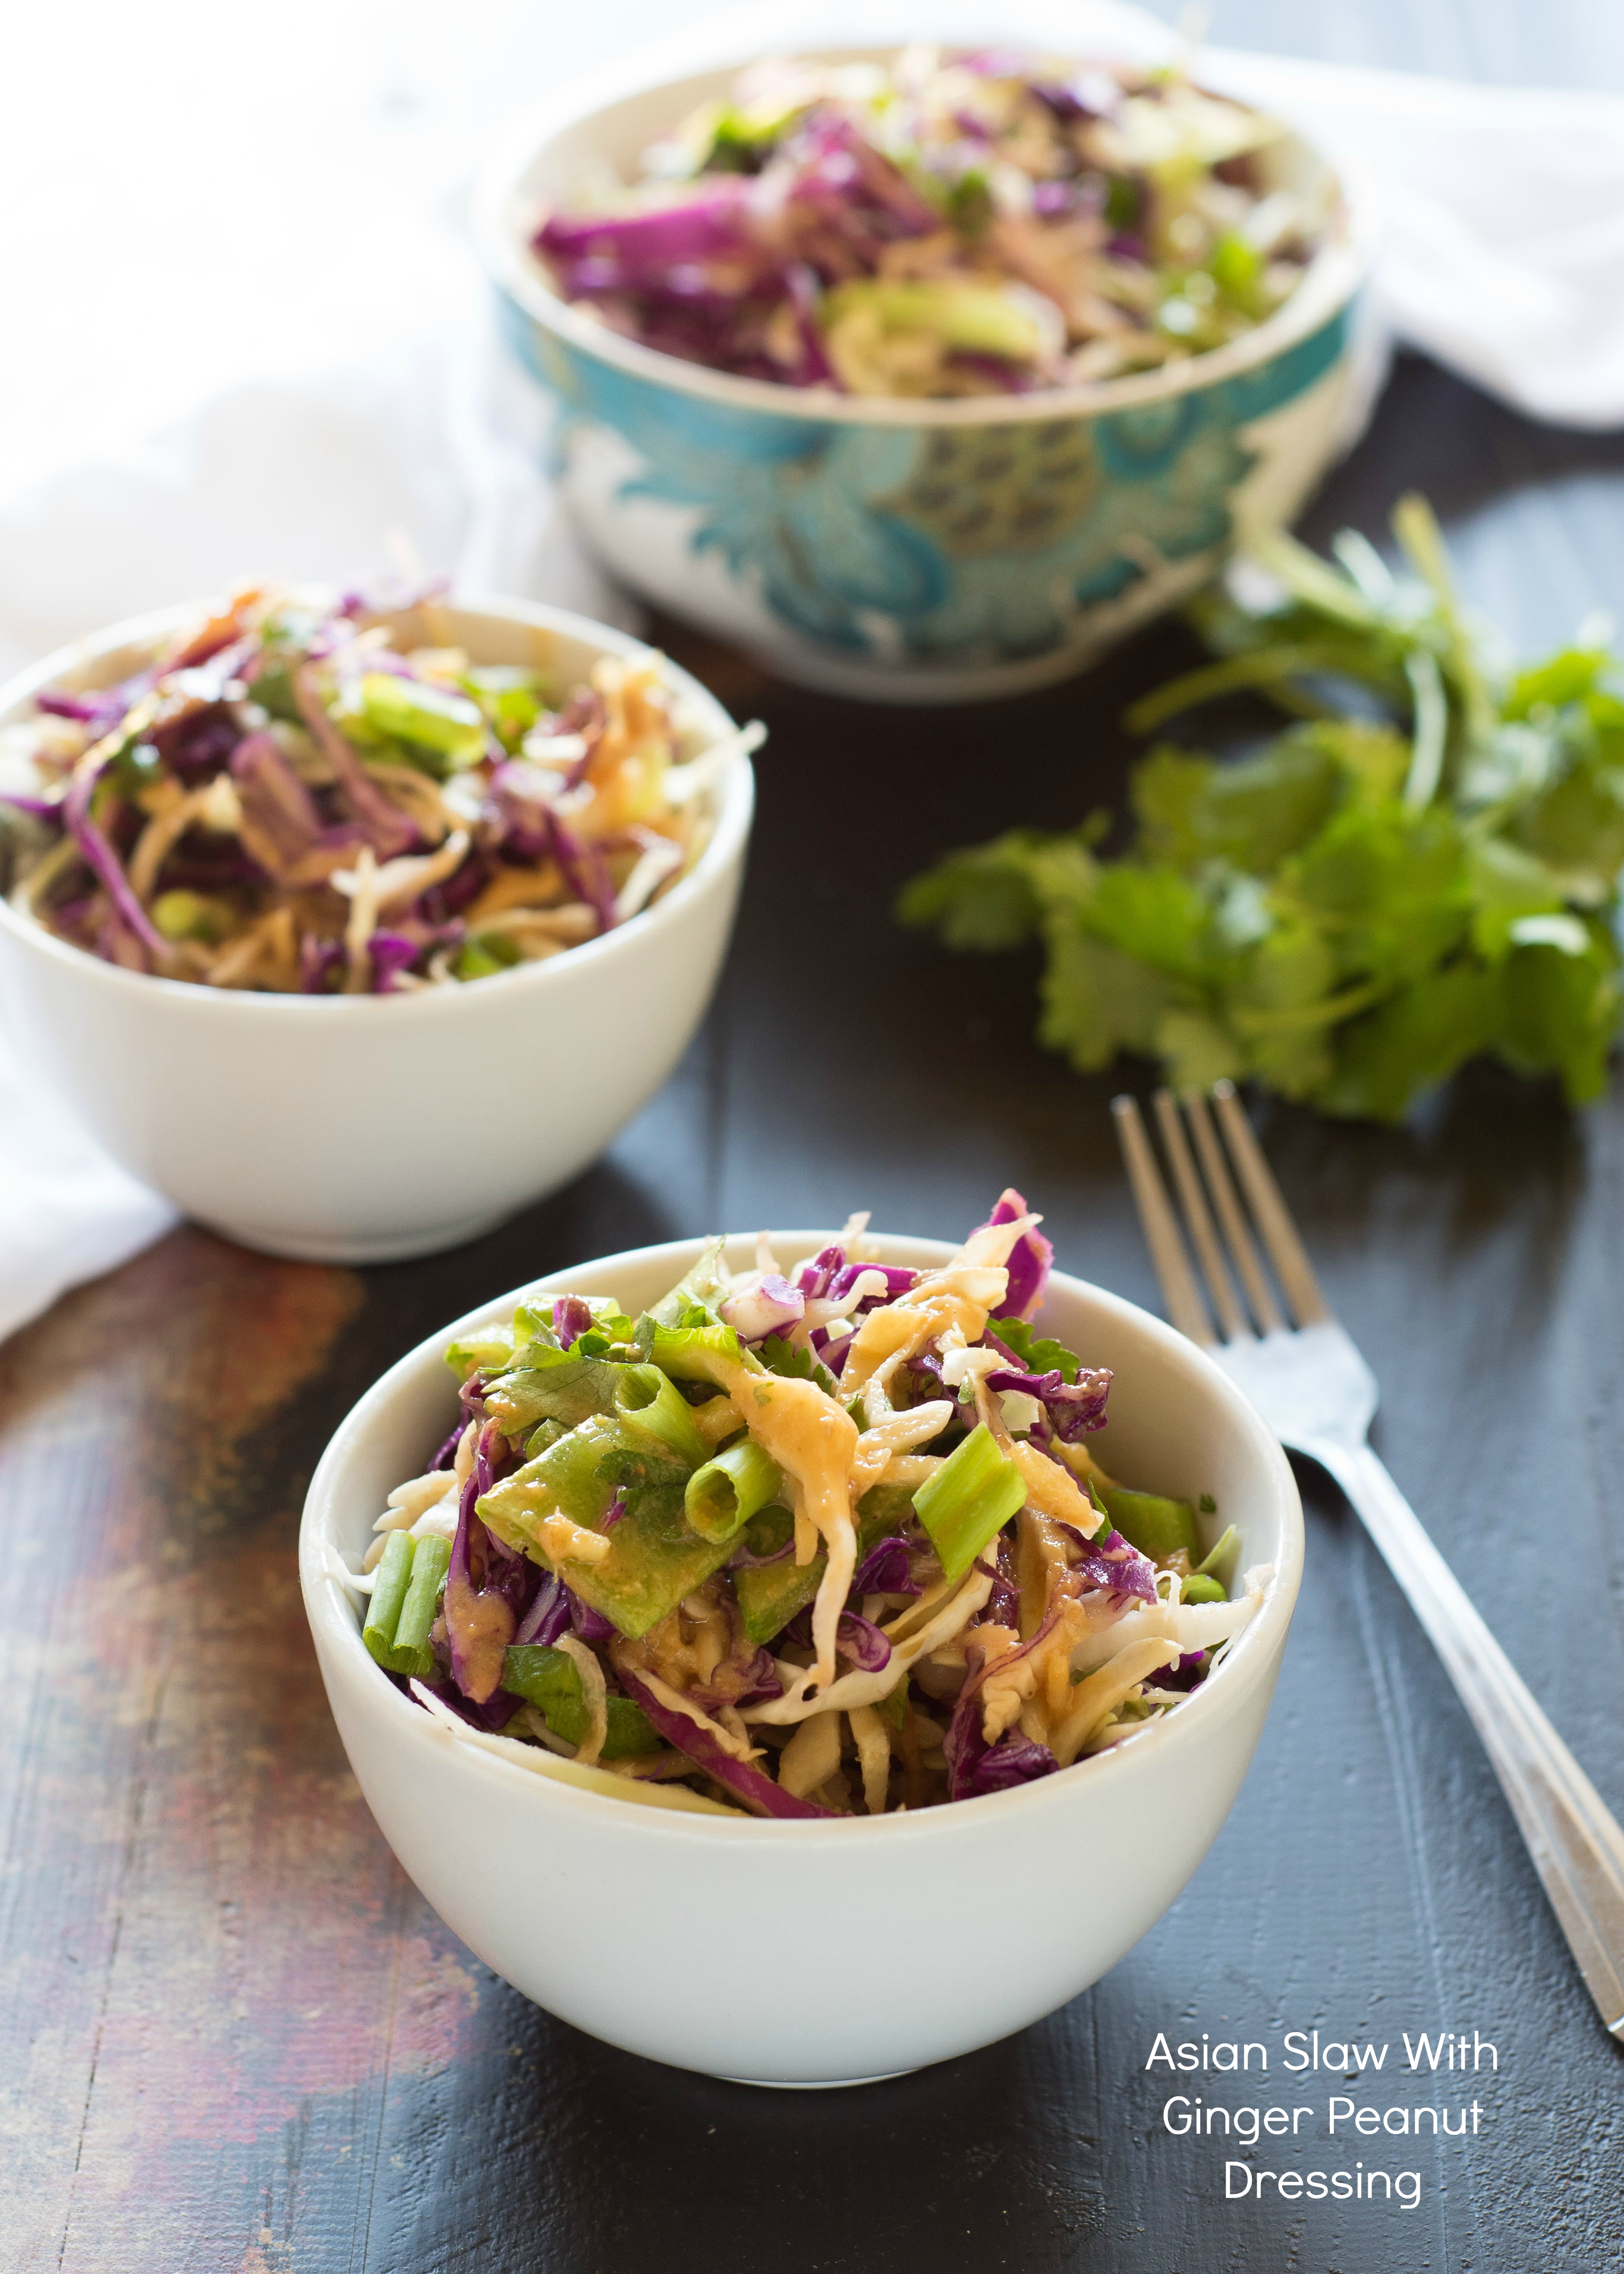 Asian Slaw With Ginger Peanut Dressing- this slaw packs a ton of flavor with the soy ginger peanut dressing. You will love it! | Nutritious Eats